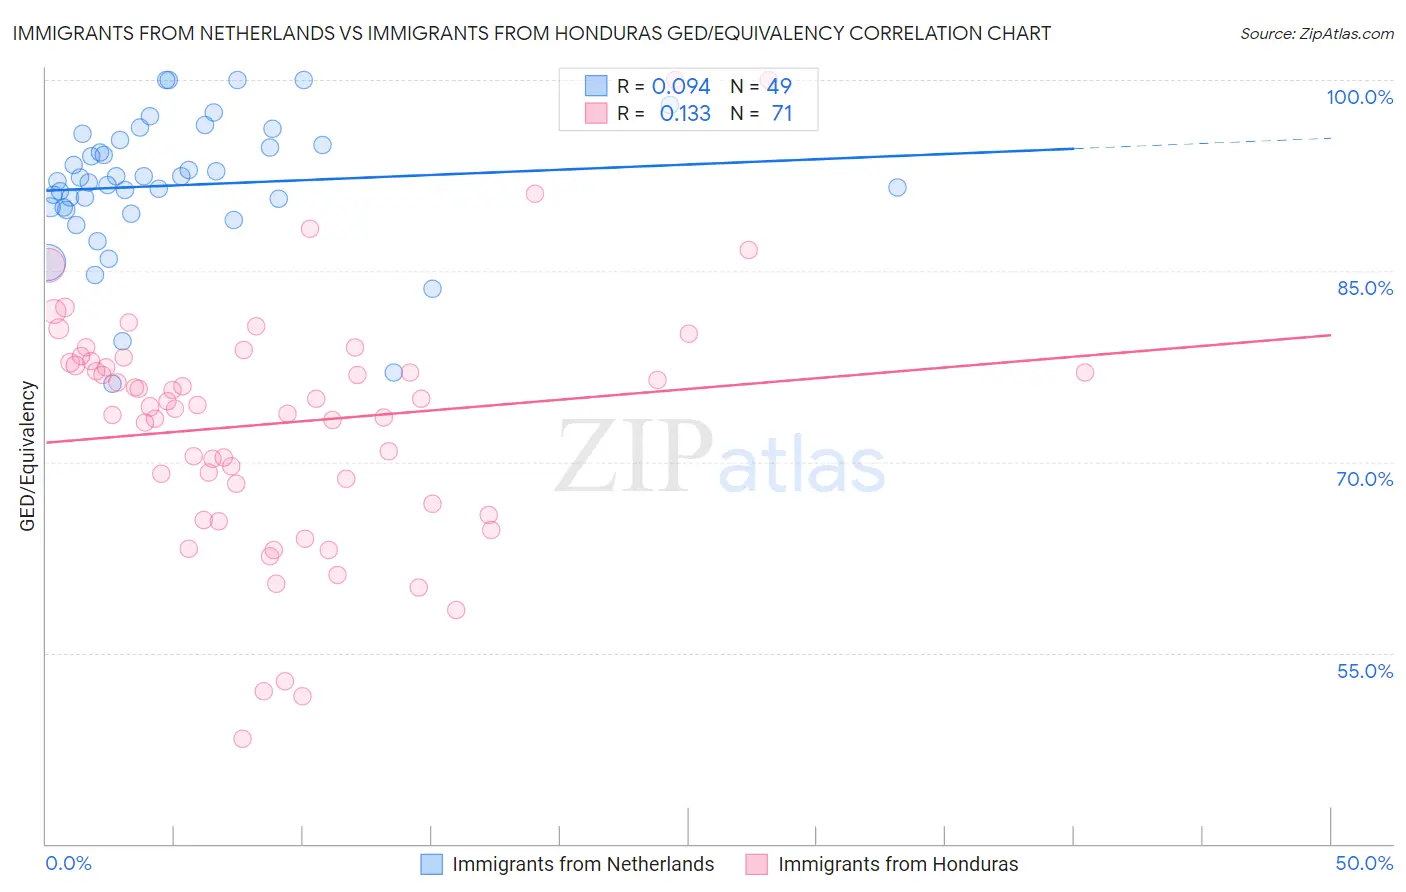 Immigrants from Netherlands vs Immigrants from Honduras GED/Equivalency